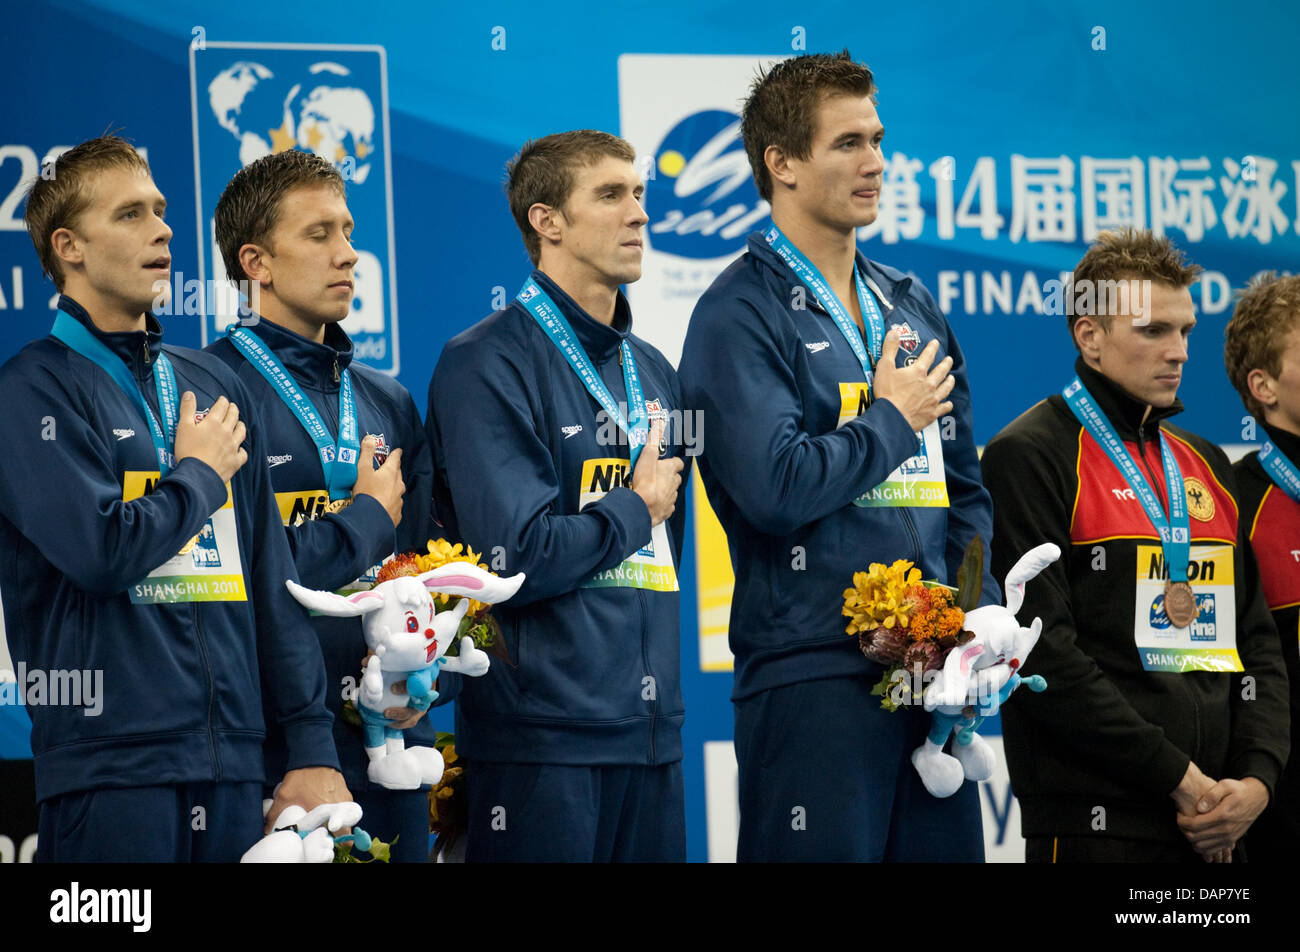 (L-R) Gold medalists Nicholas Thoman, Mark Gangloff, Michael Phelps and Nathan Adrian of the USA and Germany's Paul Biedermann attend the medal ceremony after the 4x100 Individual Medley Relay at the 2011 FINA World Swimming Championships, Shanghai, China, 31 July 2011. USA won gold, Germany bronze. Photo: Bernd Thissen dpa  +++(c) dpa - Bildfunk+++ Stock Photo